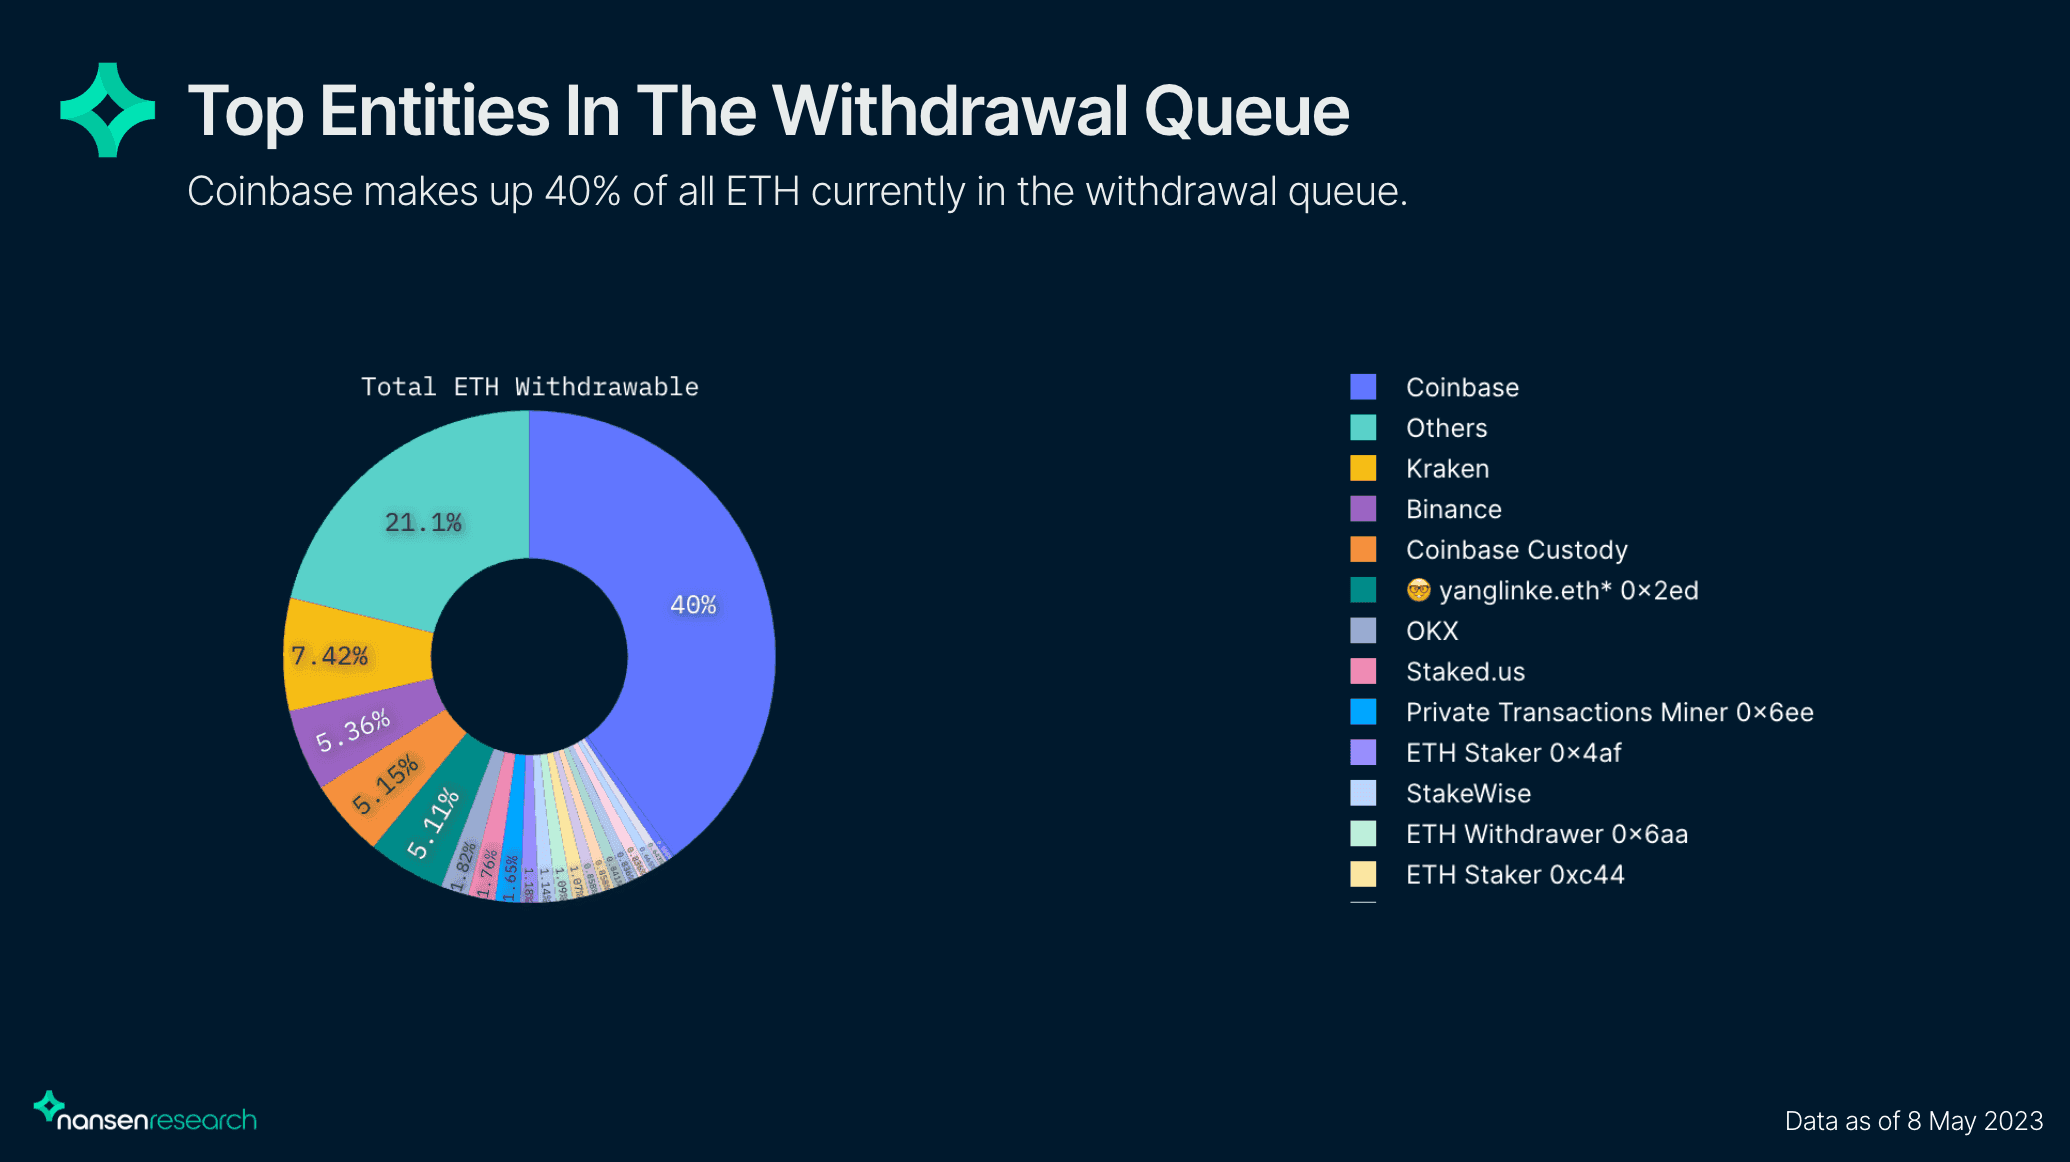 Top Entities in the Withdrawal Queue image